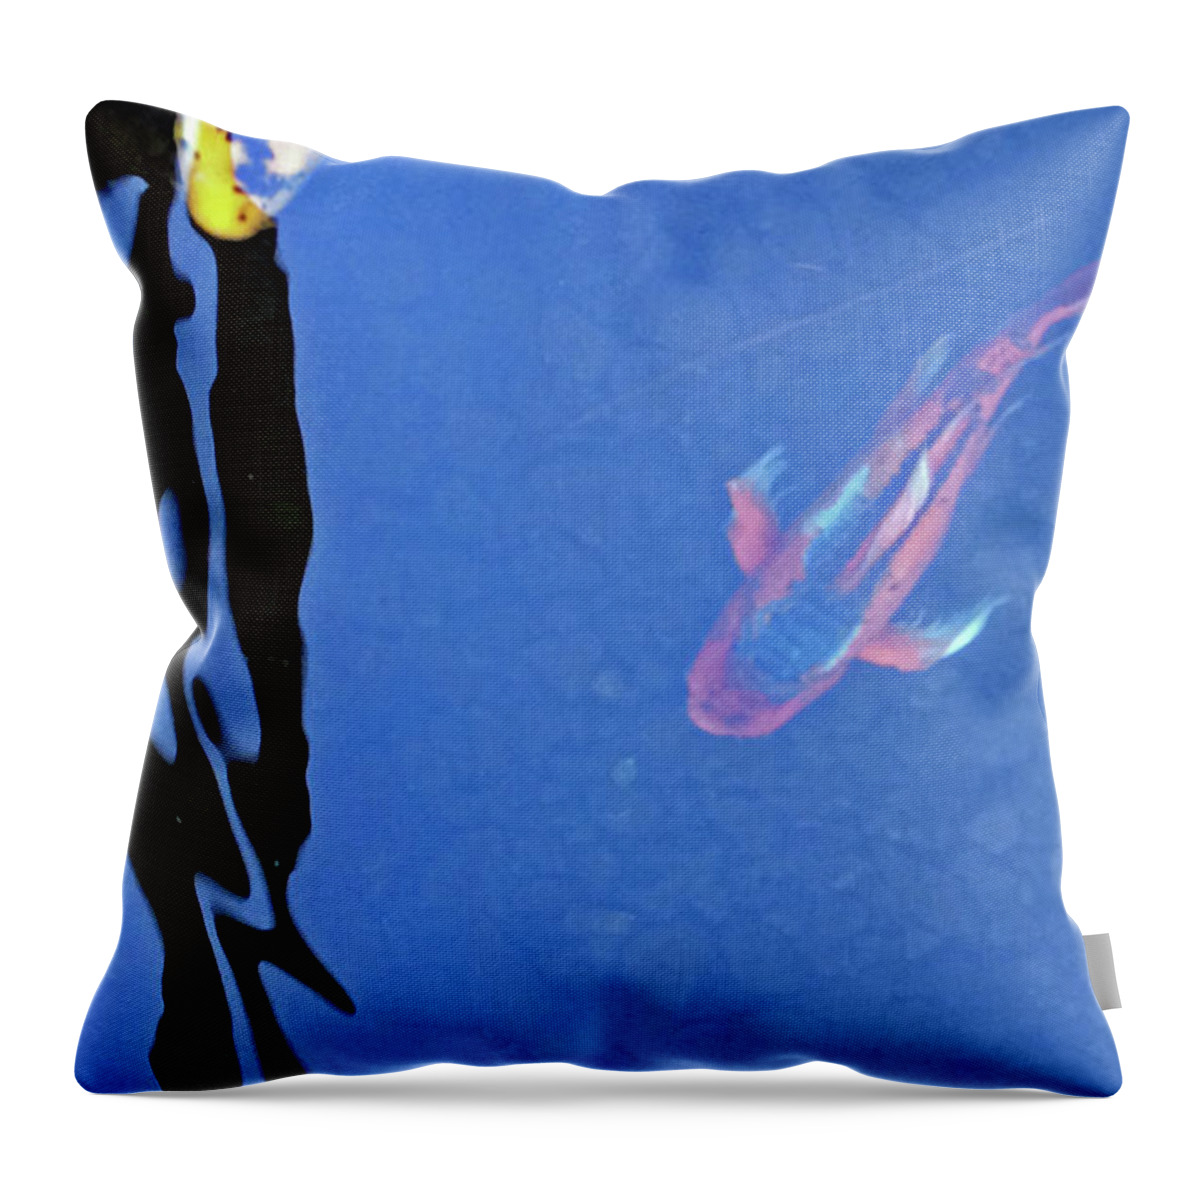 Koi Throw Pillow featuring the photograph Koi No. 5-1 by Sandy Taylor